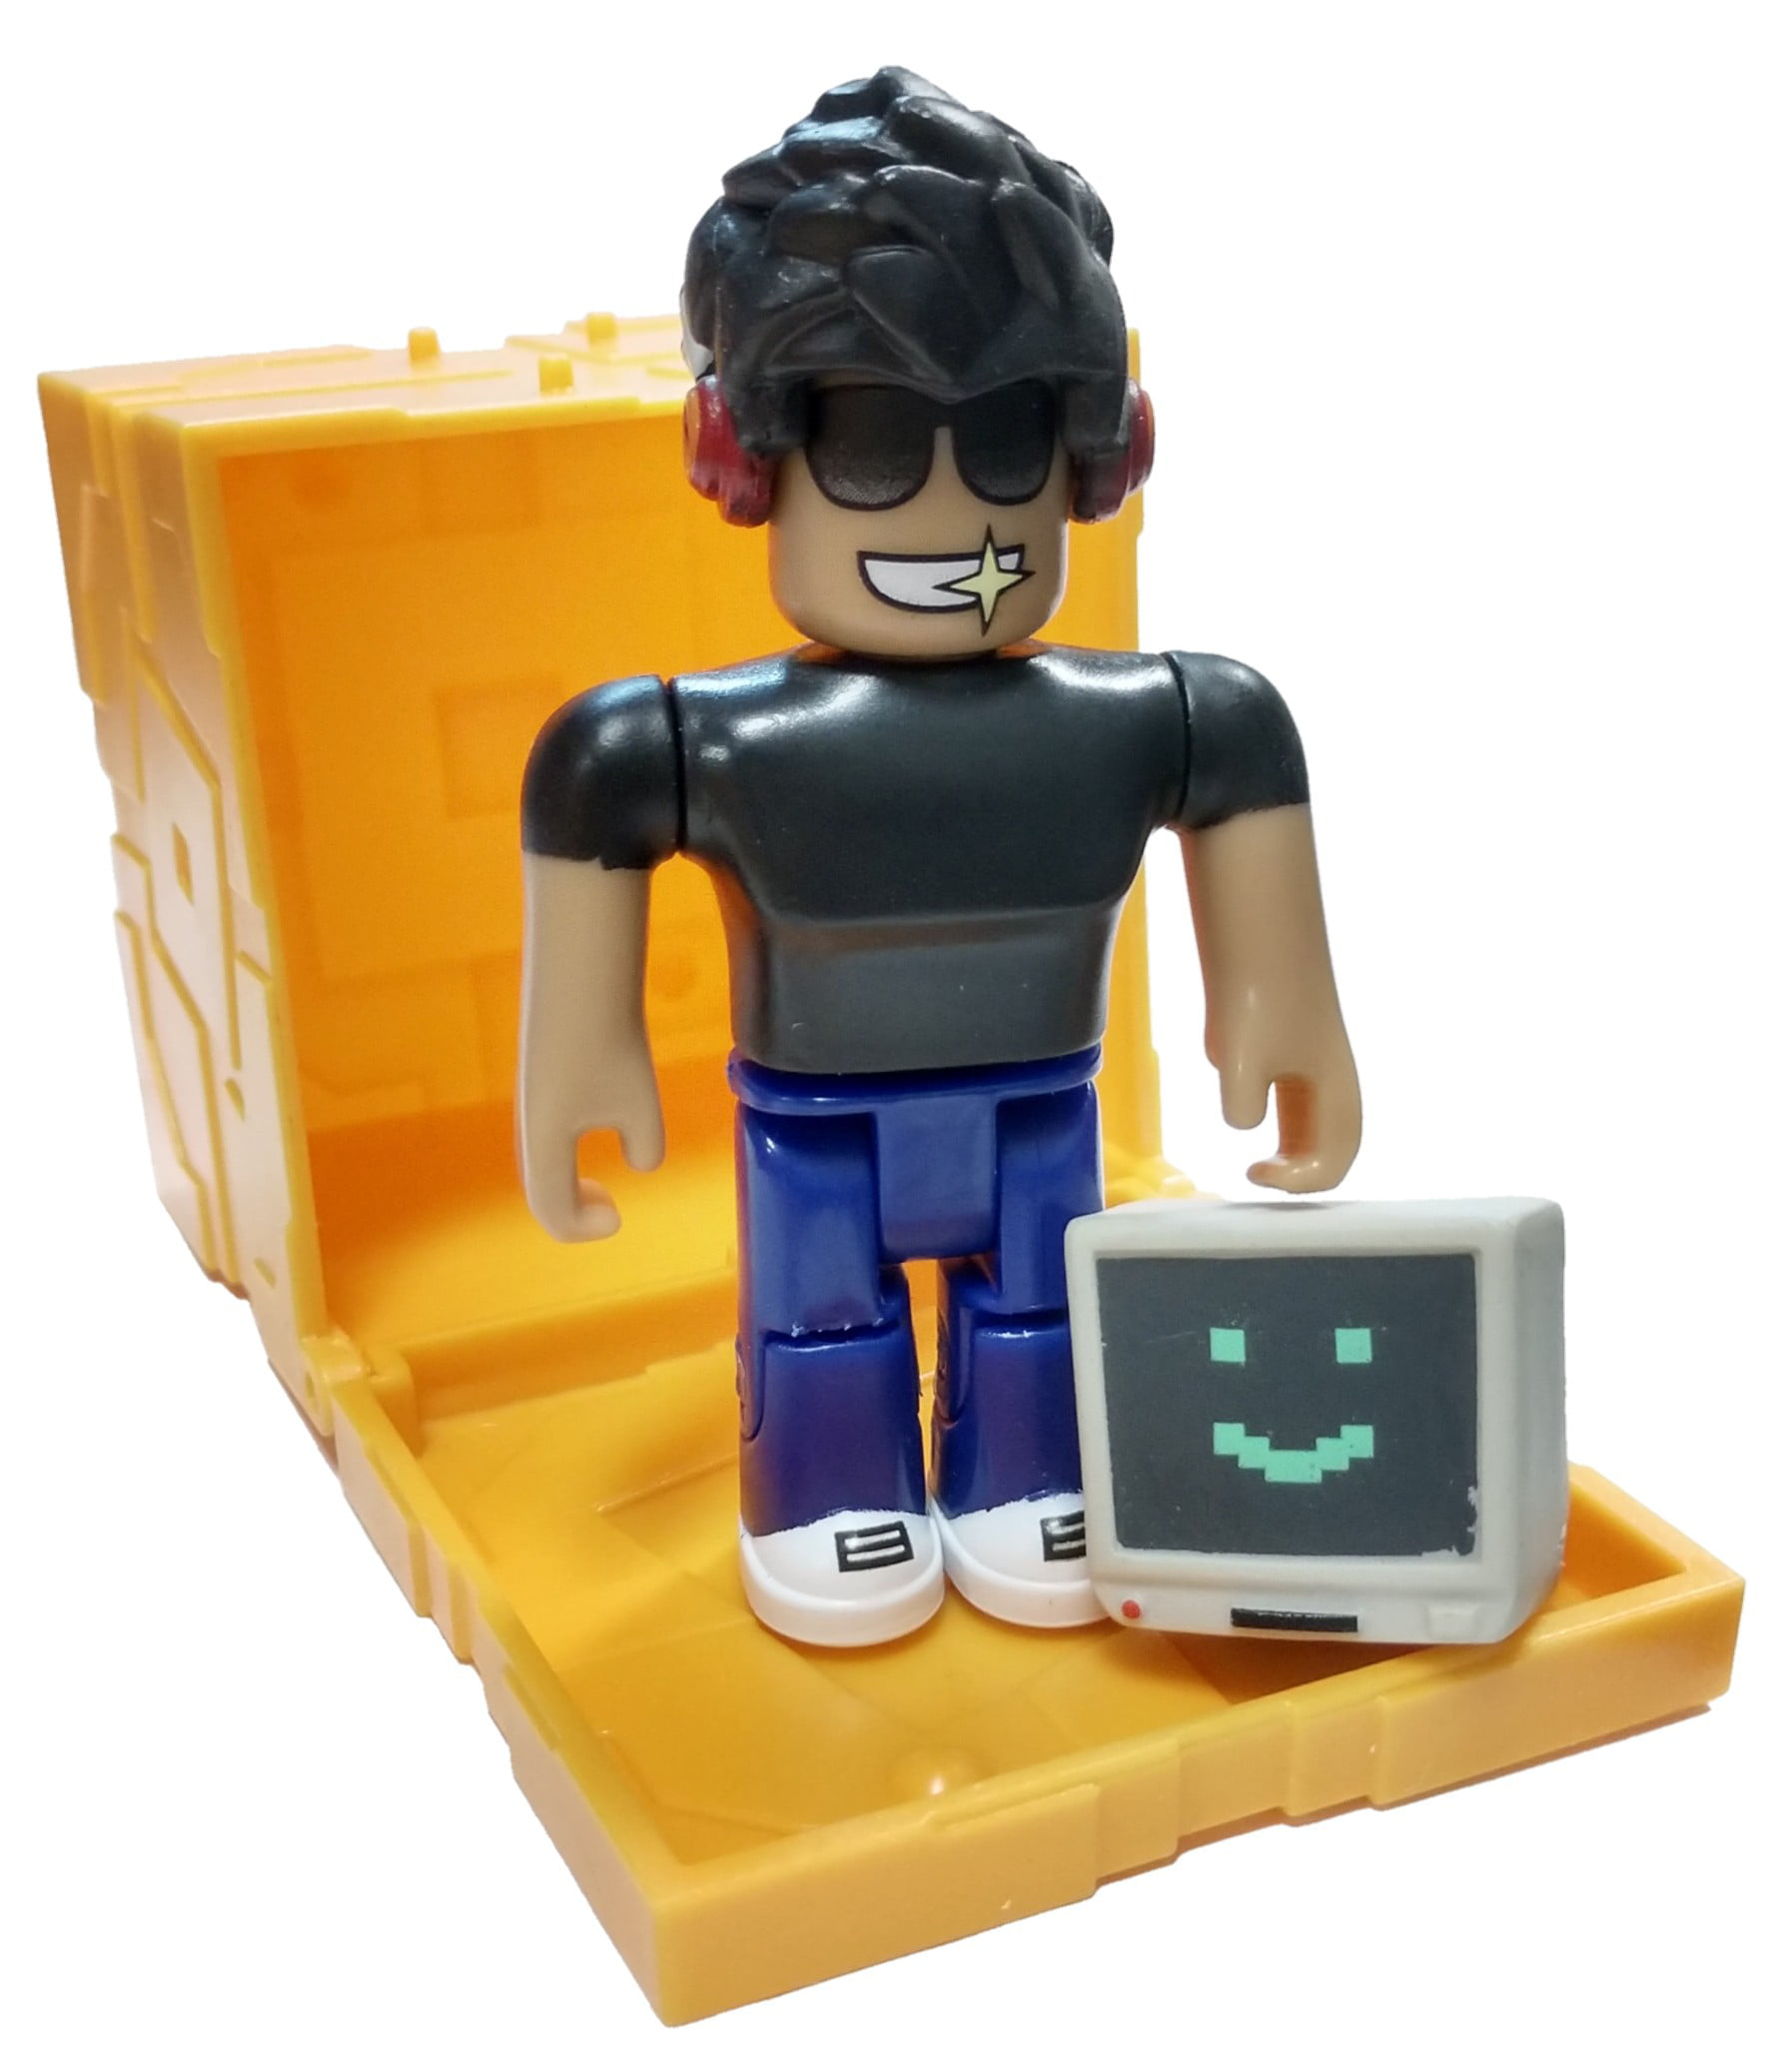 Roblox Series 5 Simbuilder Mini Figure With Gold Cube And Online Code No Packaging Walmart Com - details about simbuilder roblox mini figure with virtual game code series 5 new open